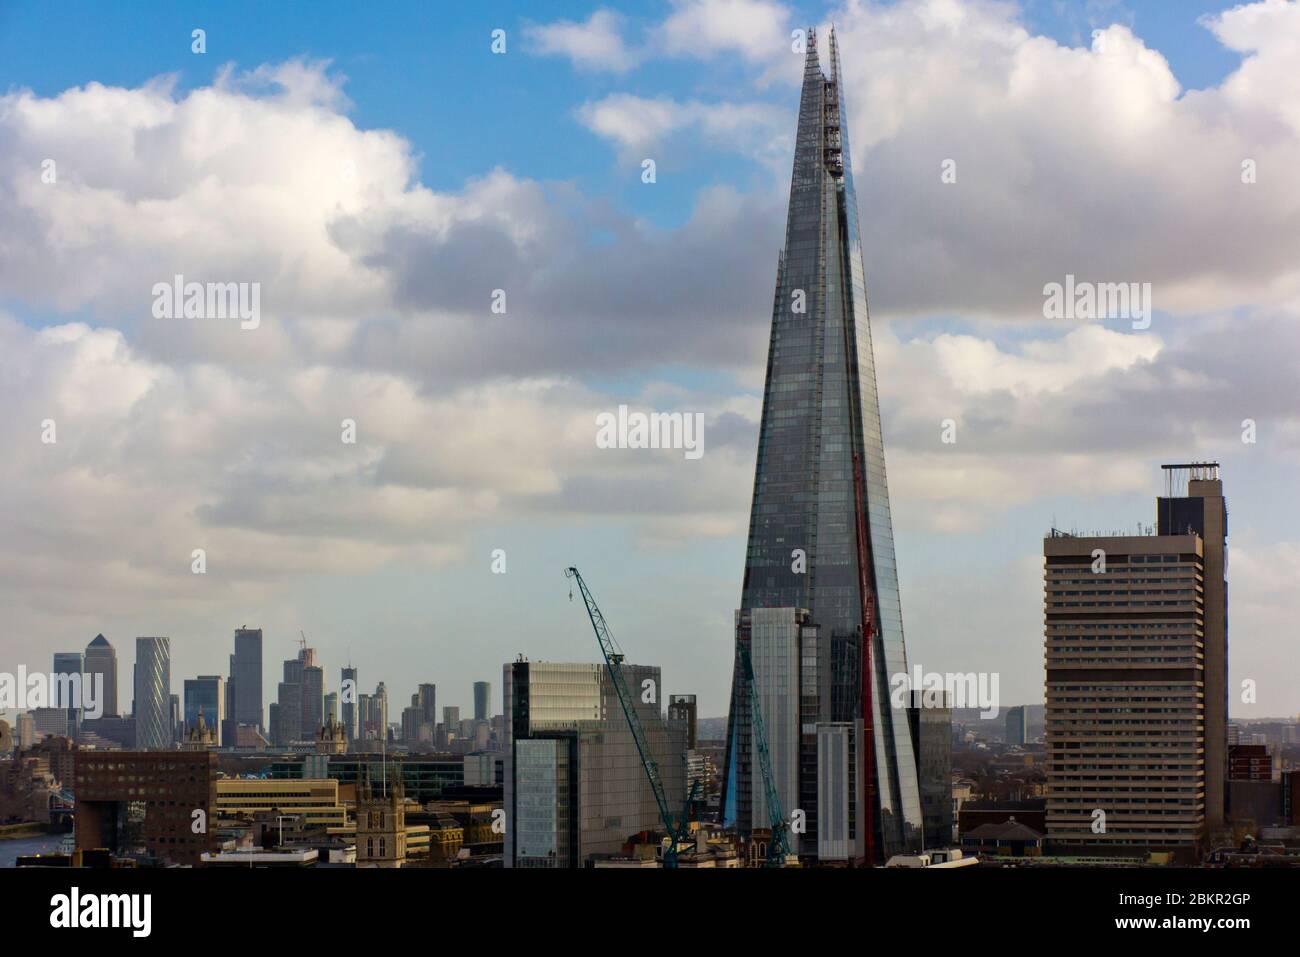 The Southwark south London skyline dominated by The Shard completed in 2012 designed by Renzo Piano and the tallest building in the United Kingdom. Stock Photo